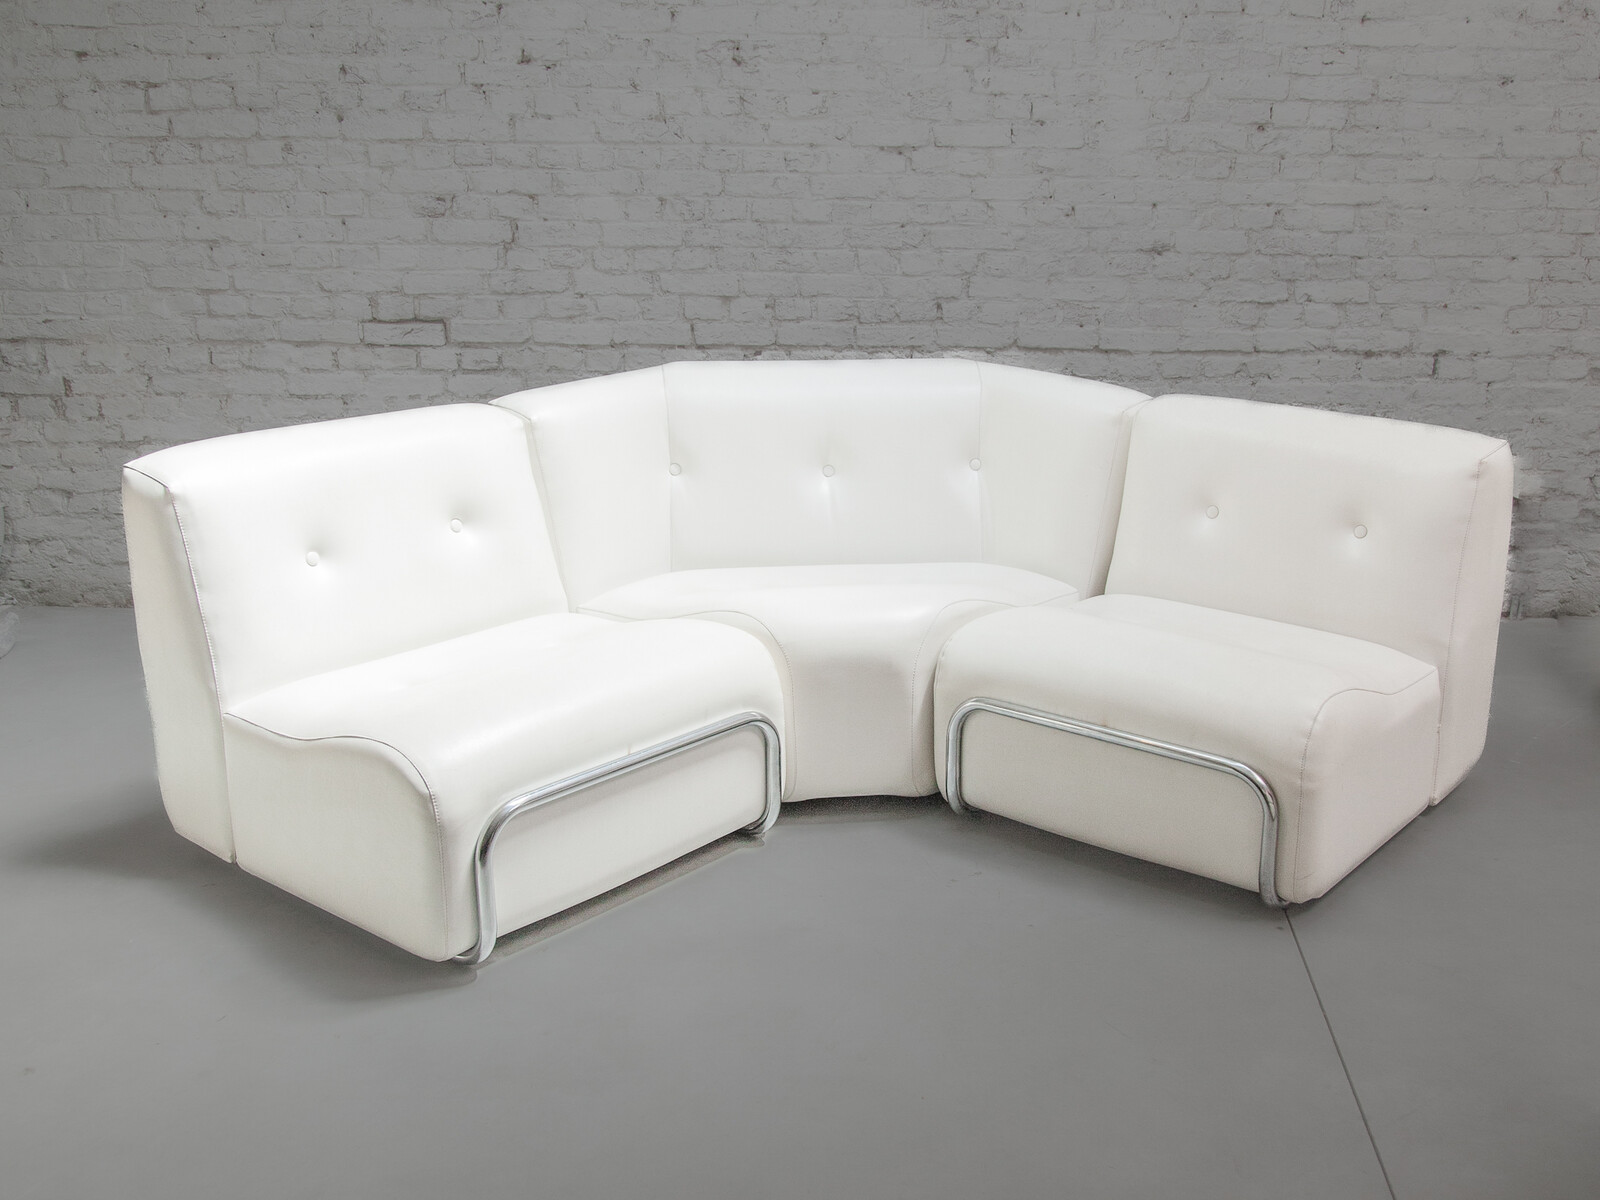 Modular 8 piece Living-roomset with Lounge Chairs and Footstools by Adriano Piazzesi